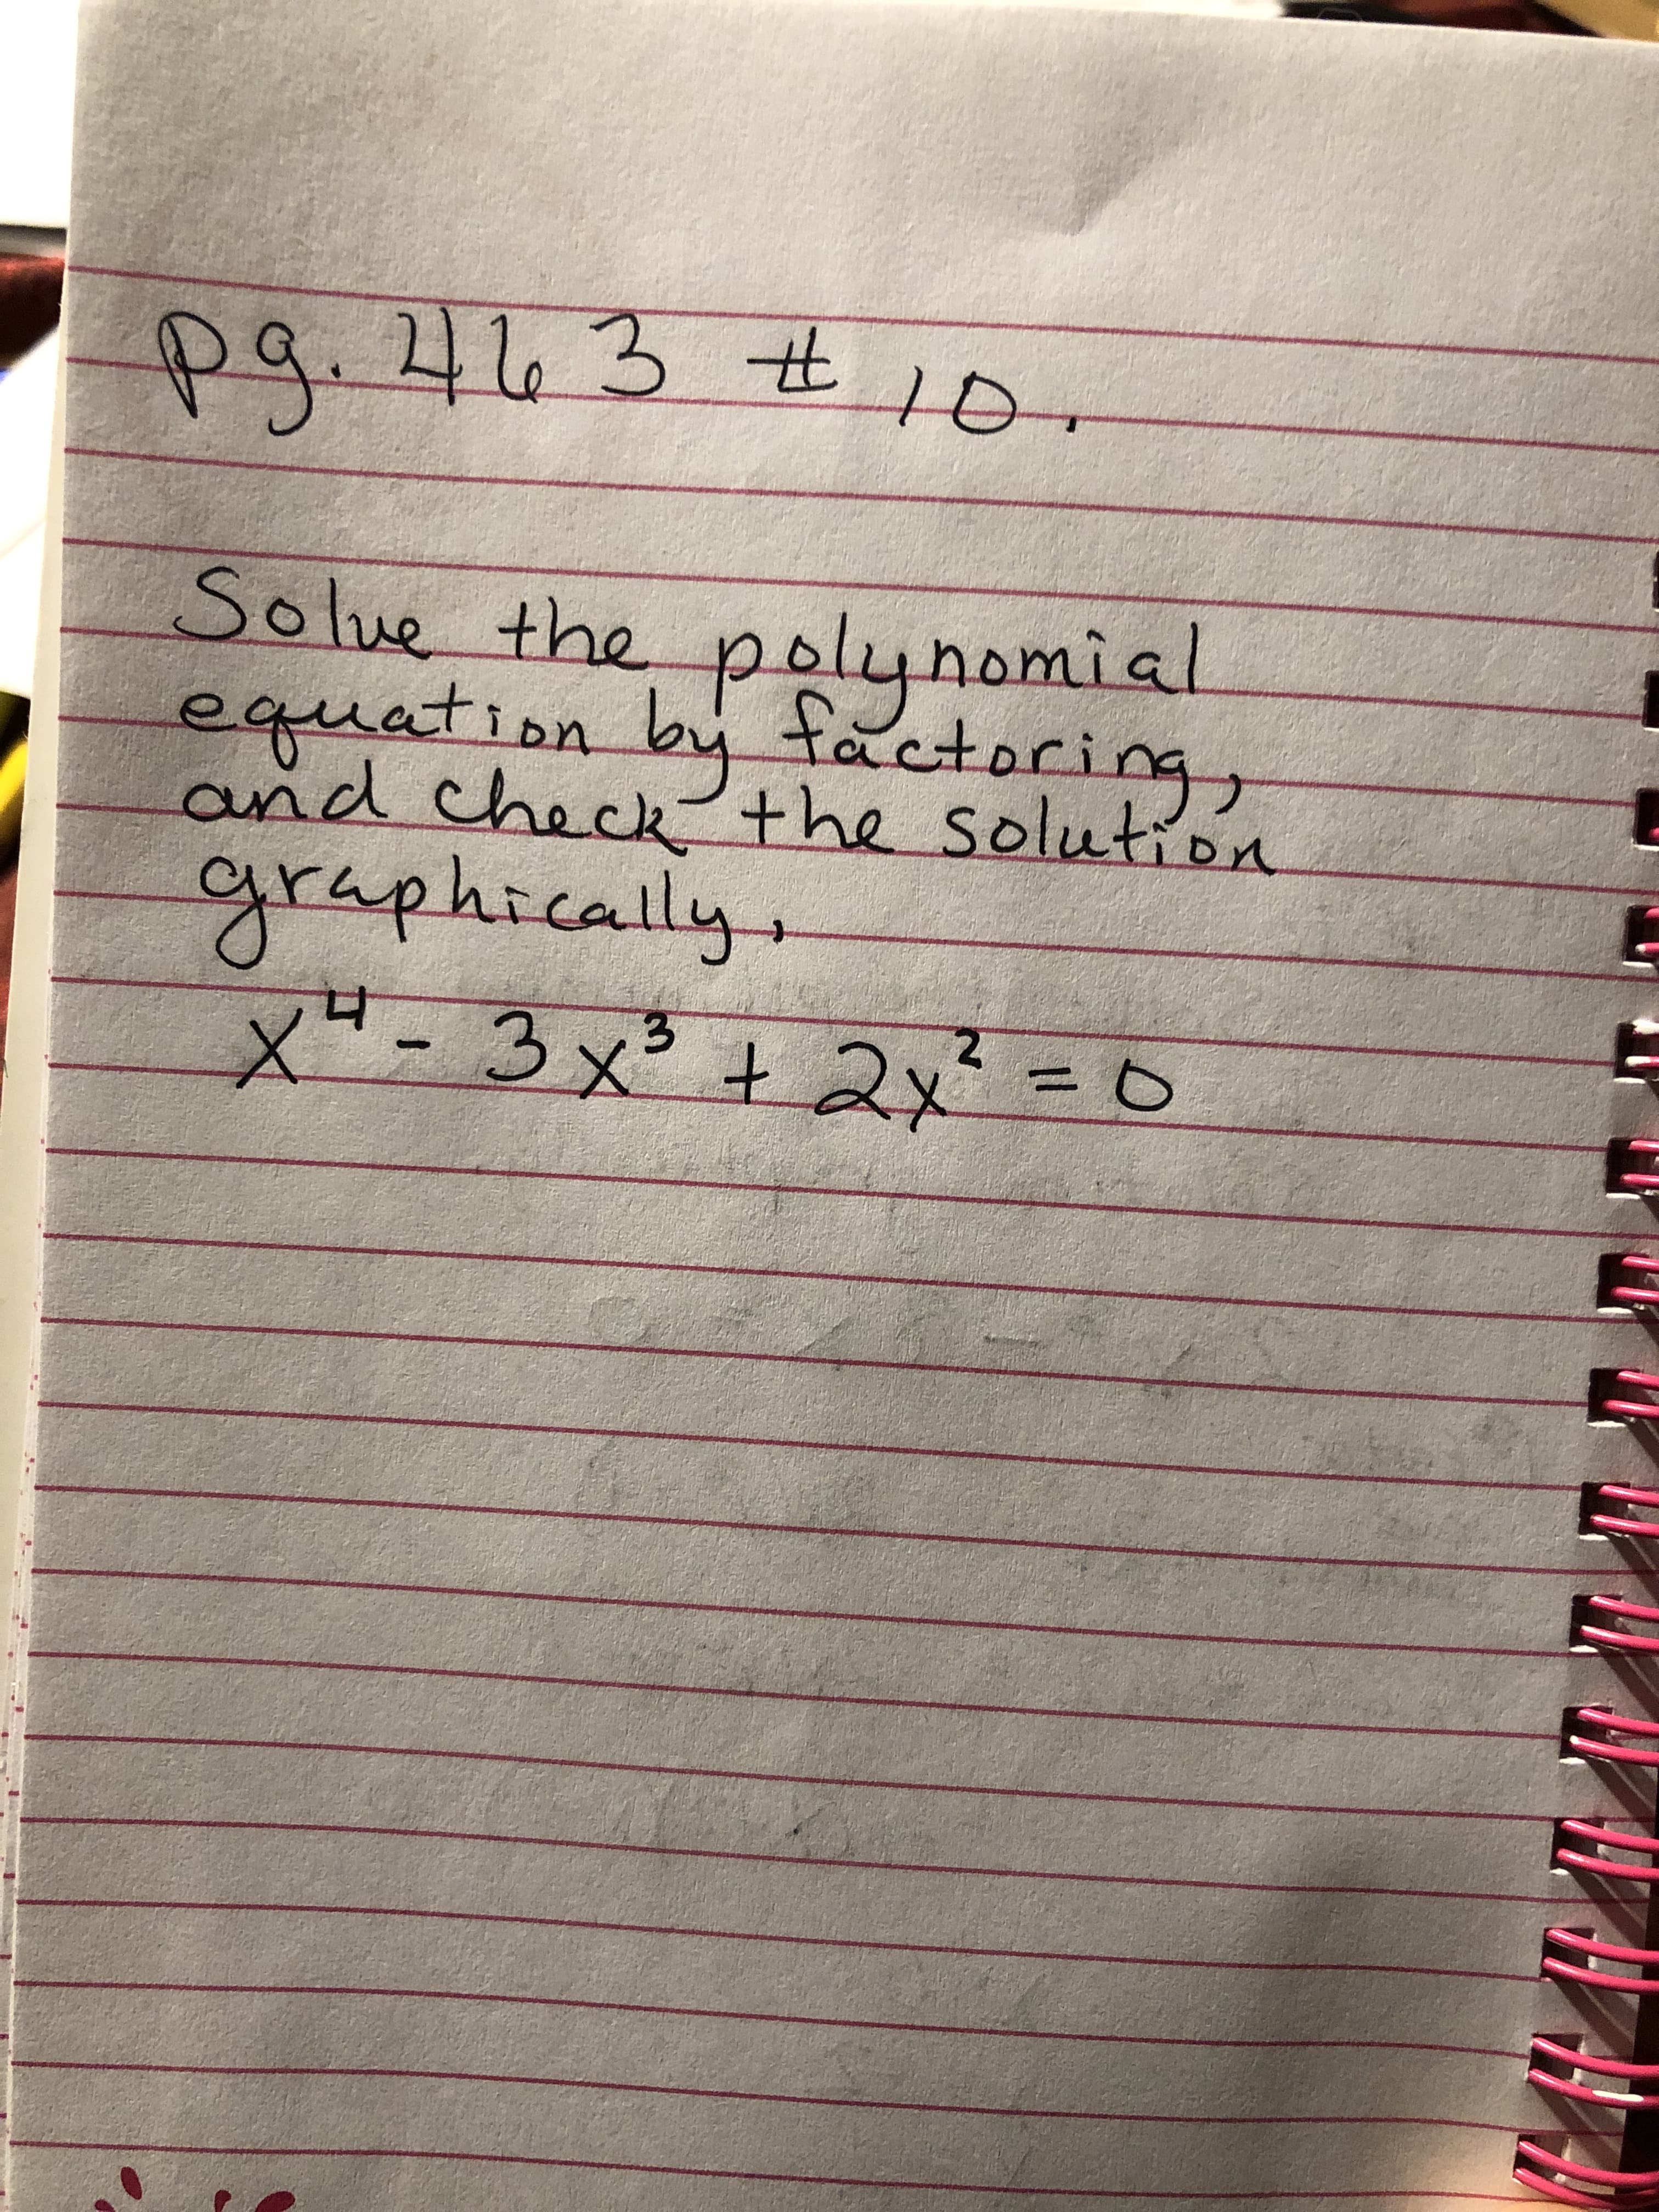 pg.463 #10.
Solue the polynomial
equation by factoring,
and check²the solution
graphically,
X-3x² + 2x=0
চাरप
%3D
